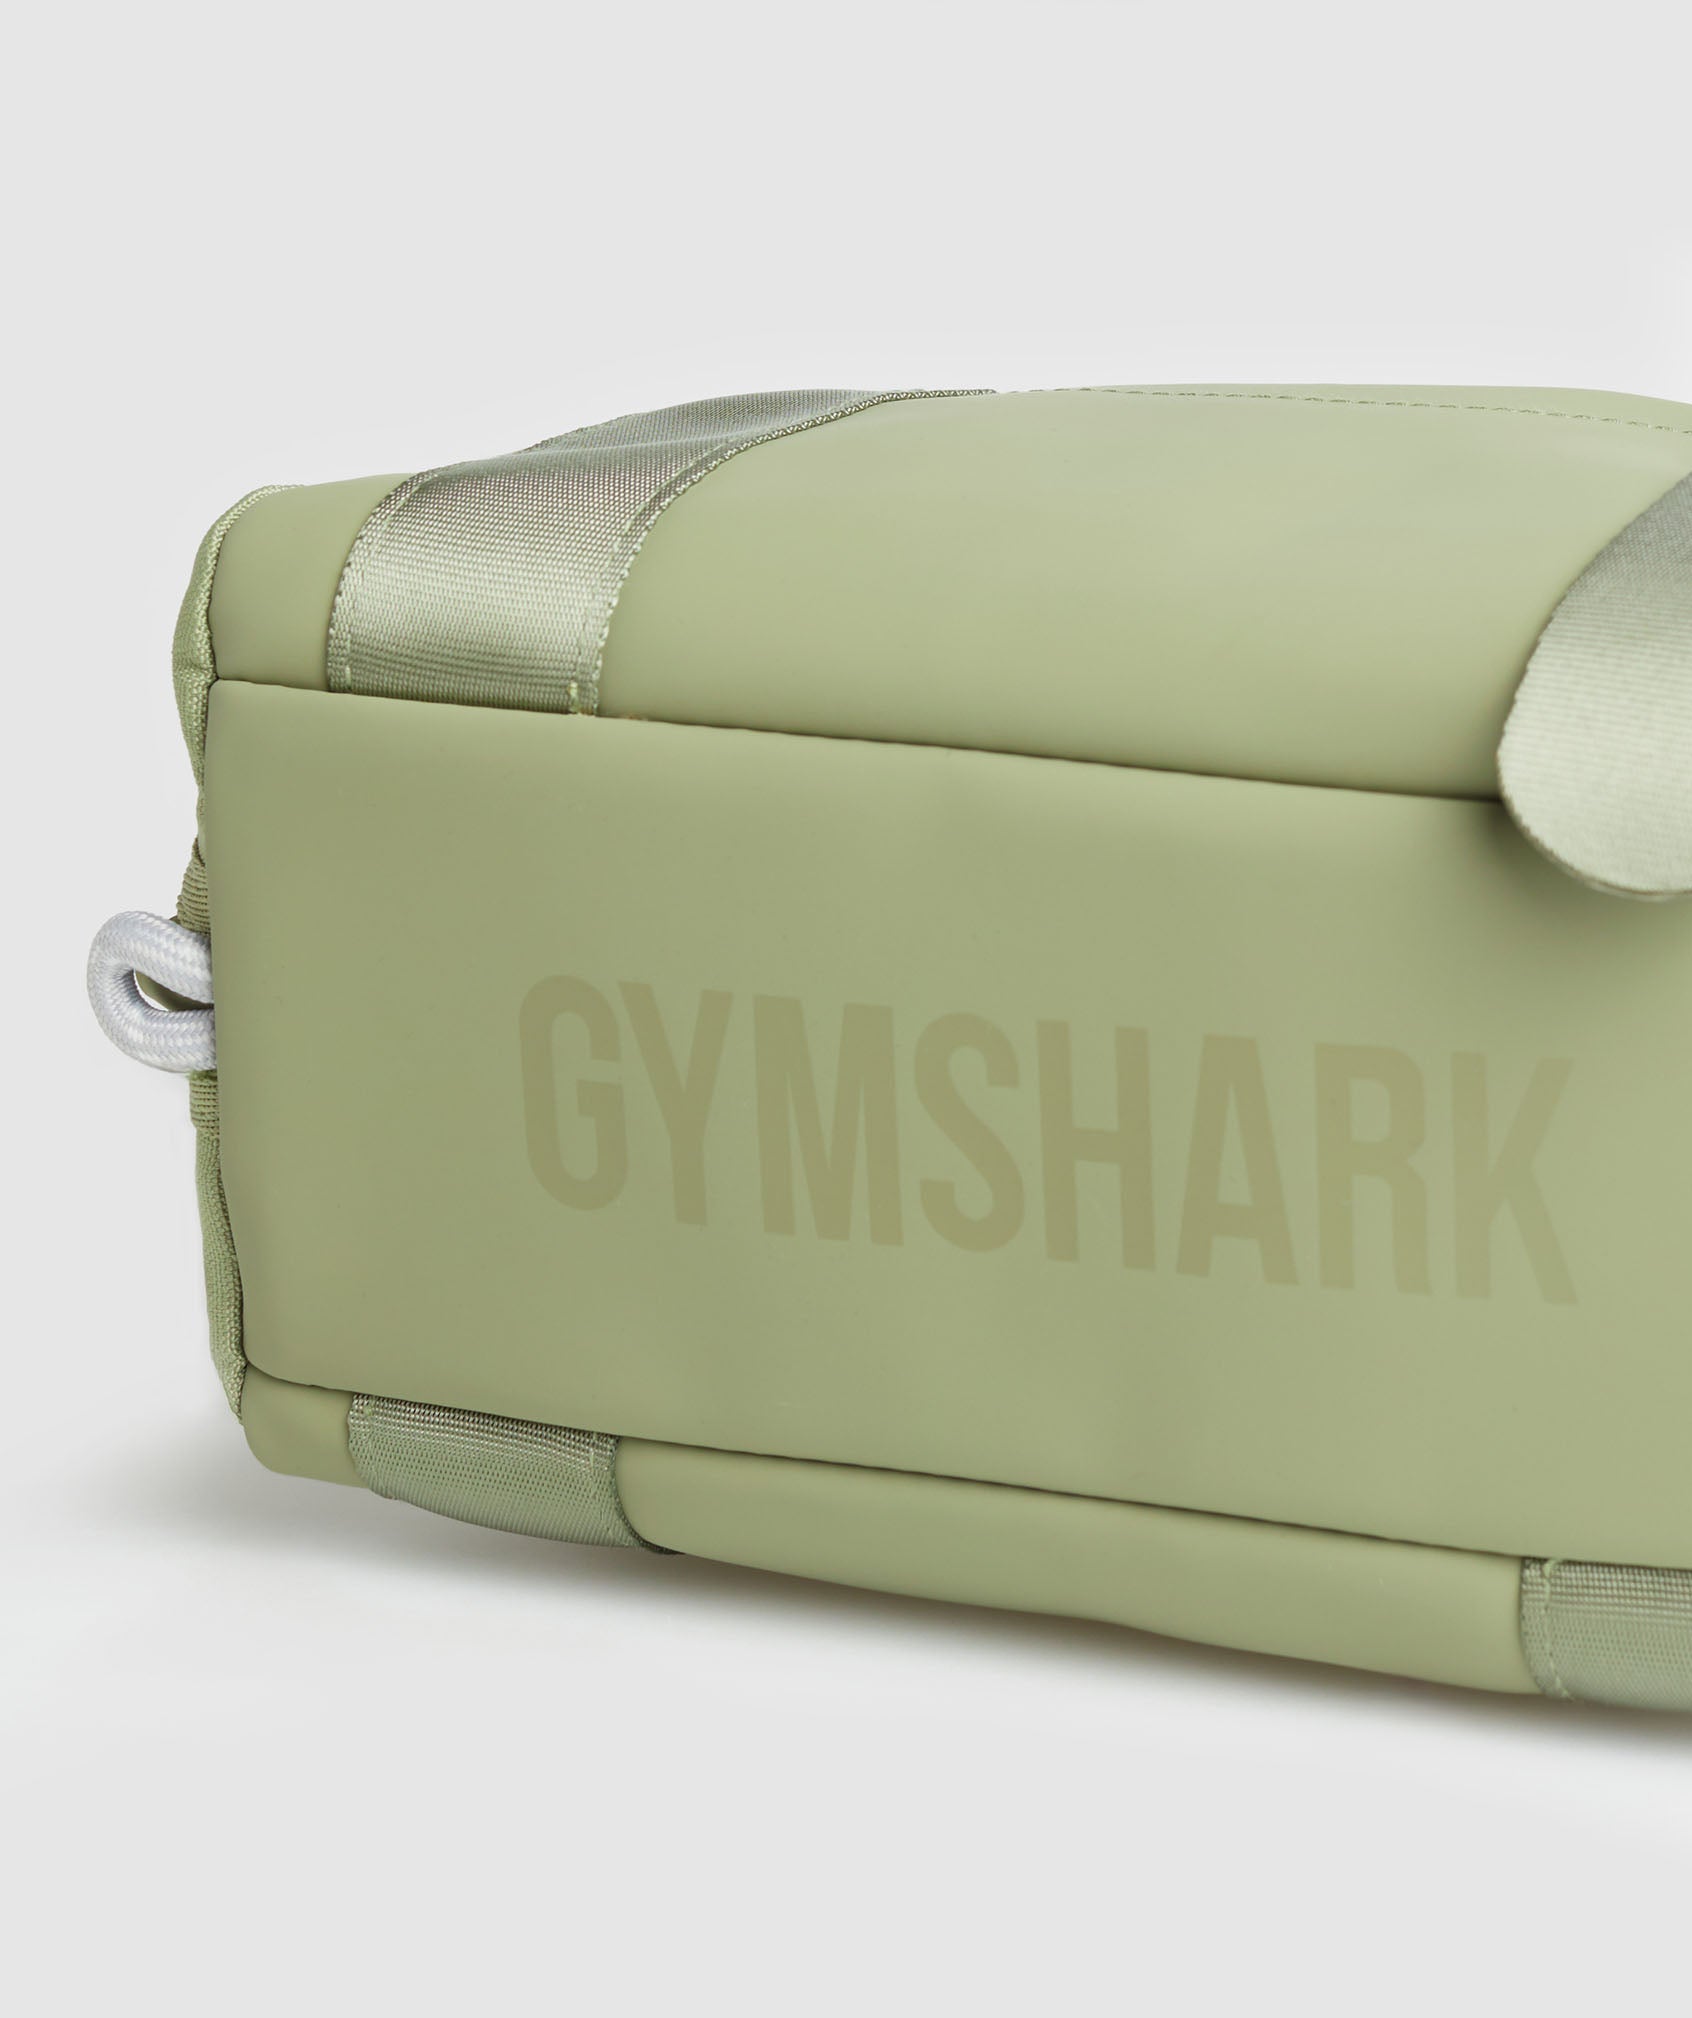 Everyday Mini Gym Bag in Natural Sage Green - view 3